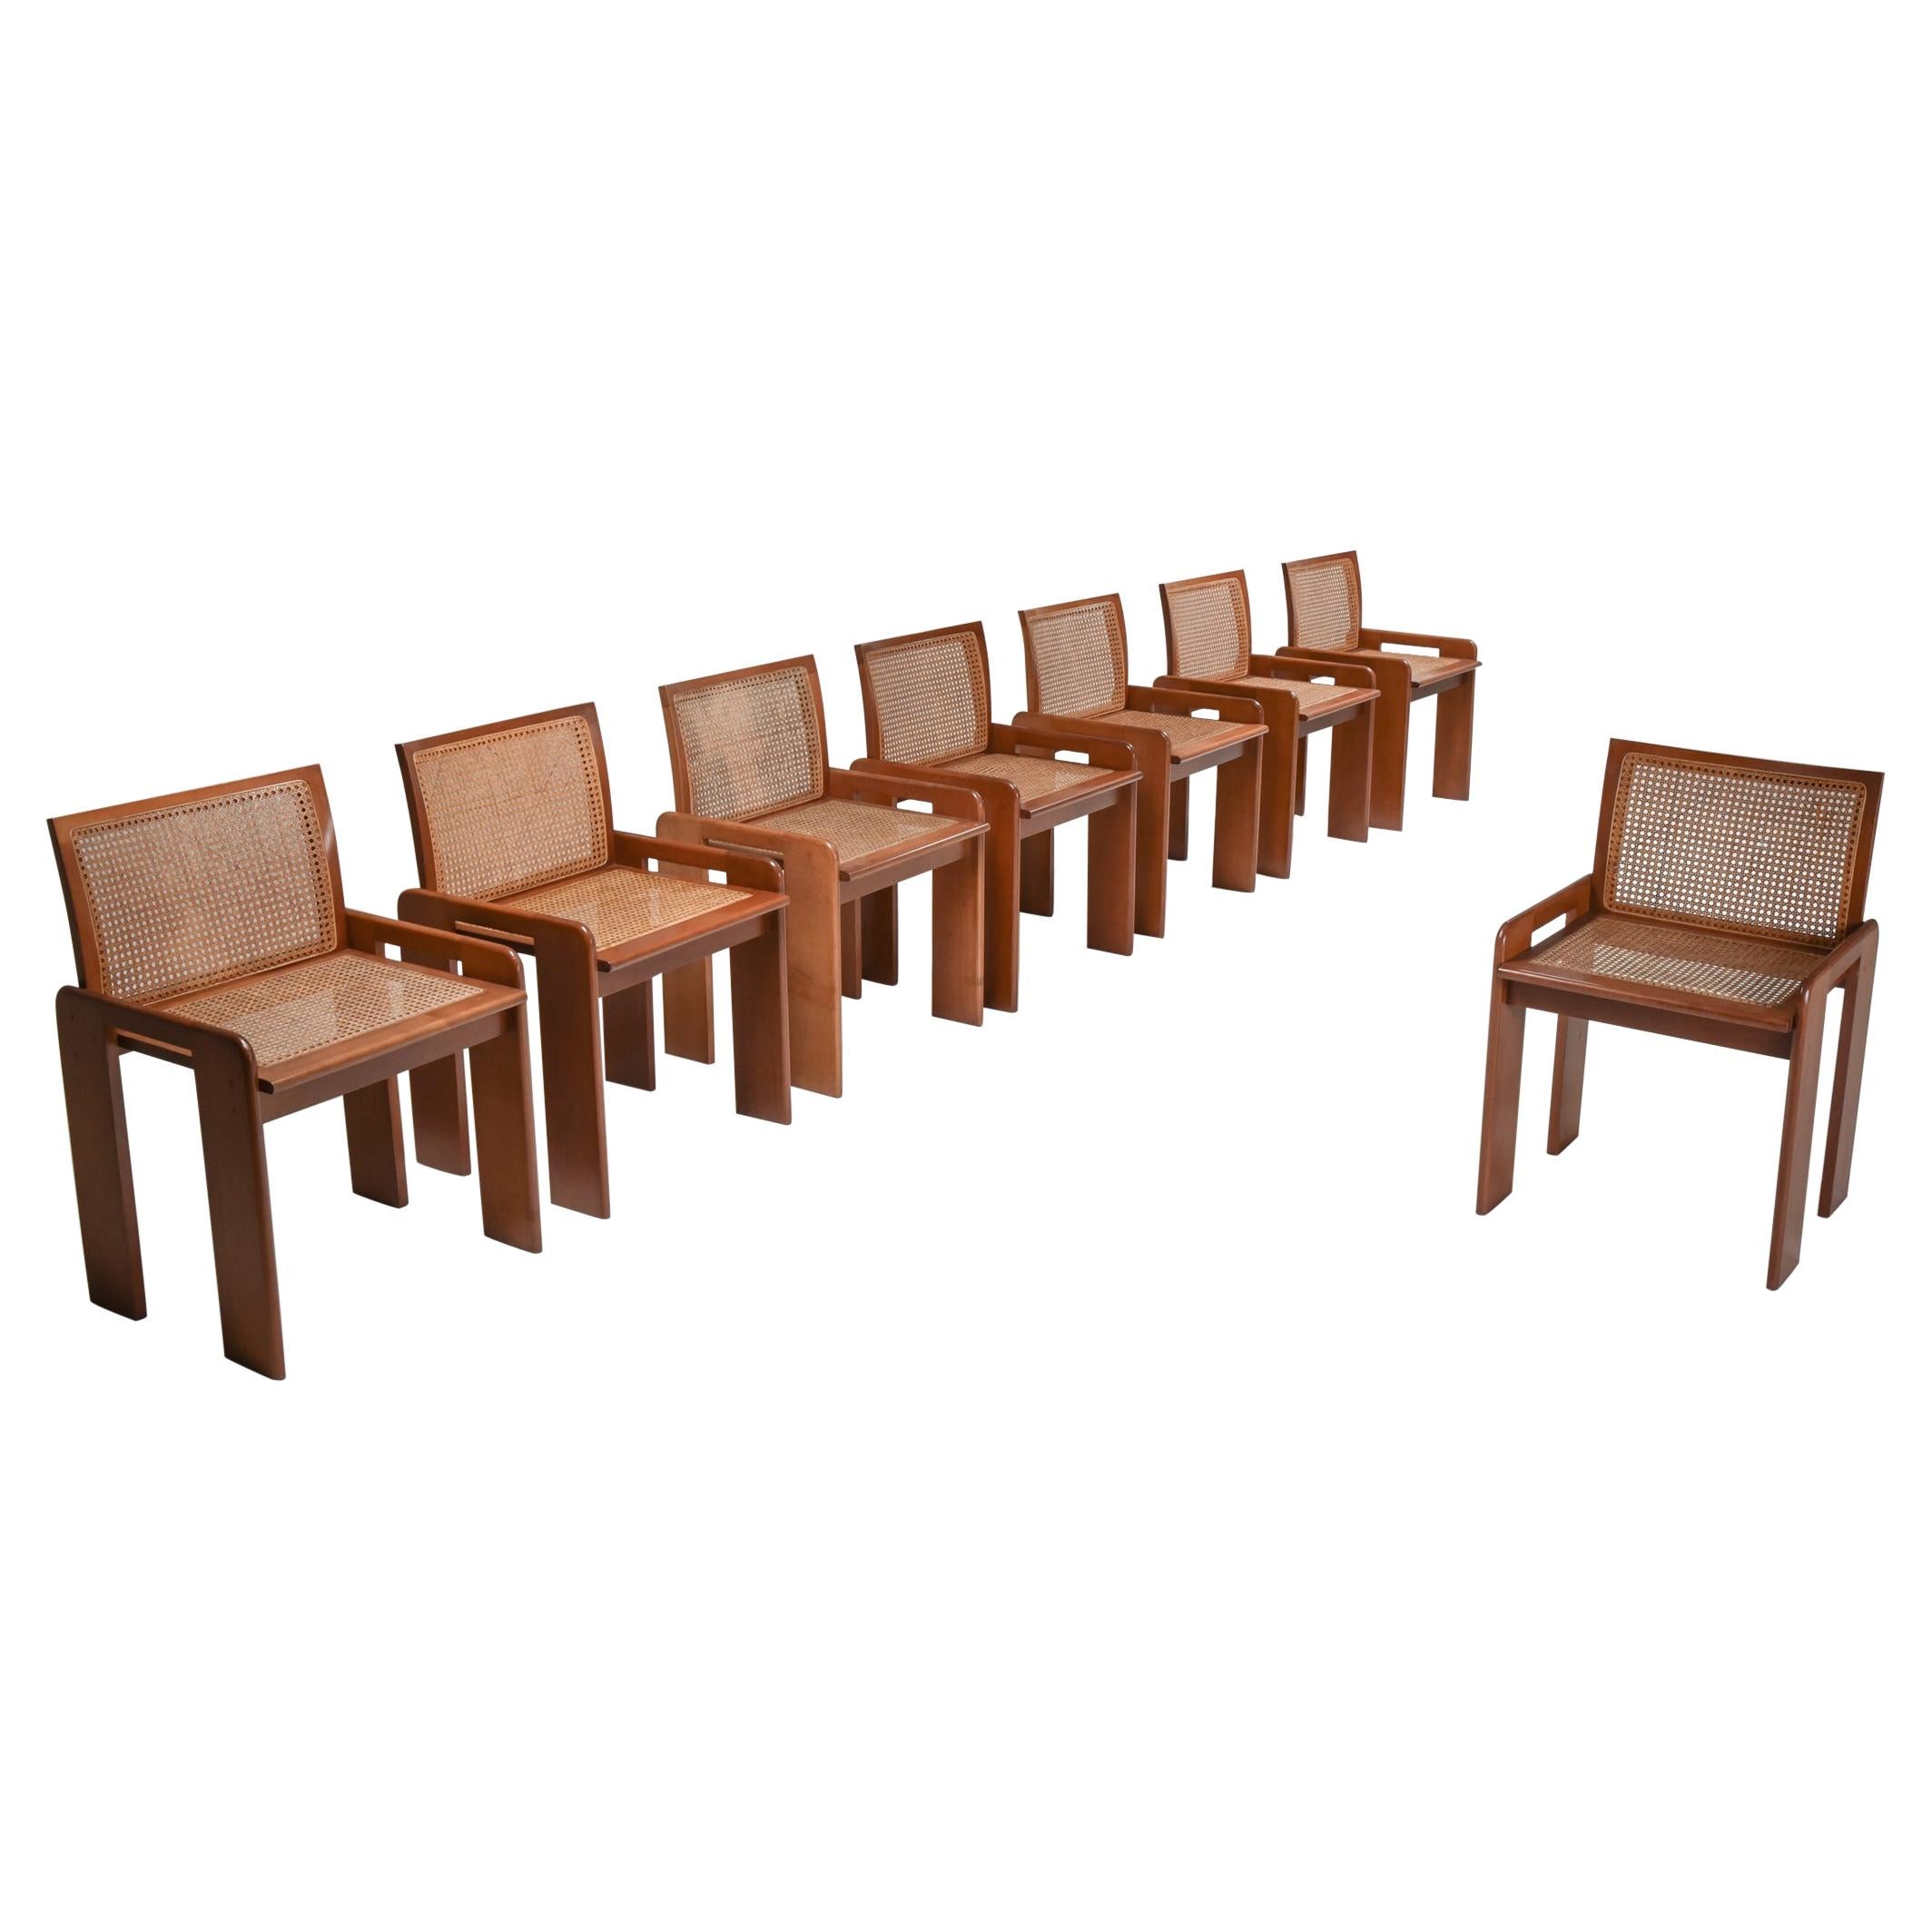 Scarpa Style Italian Dining Chairs in Walnut and Cane Seating